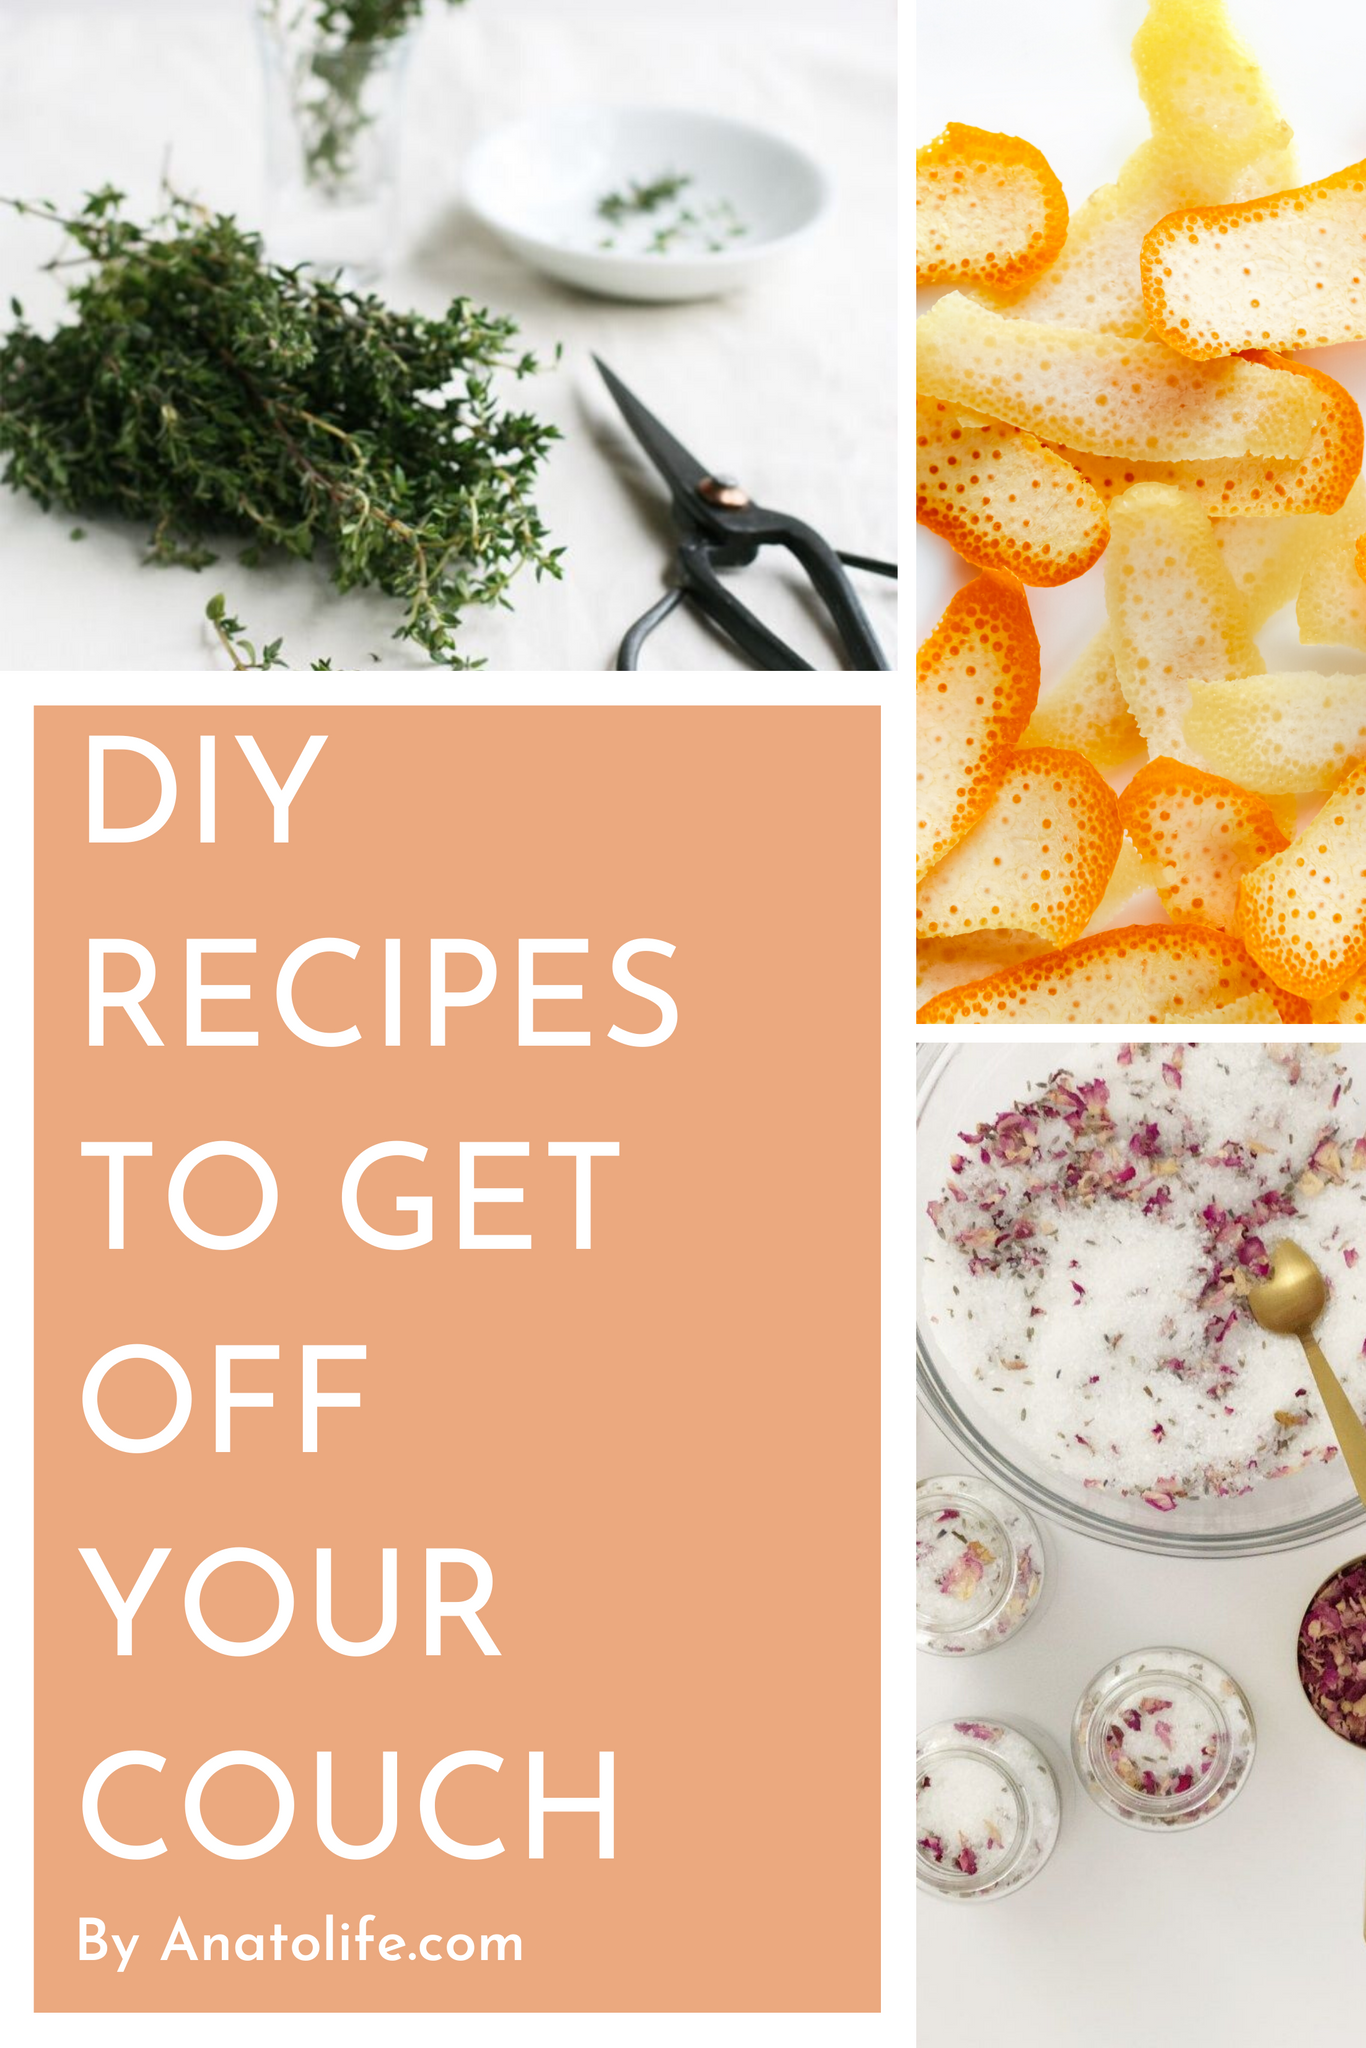 DIY RECIPES TO GET OFF YOUR COUCH BY ANATO